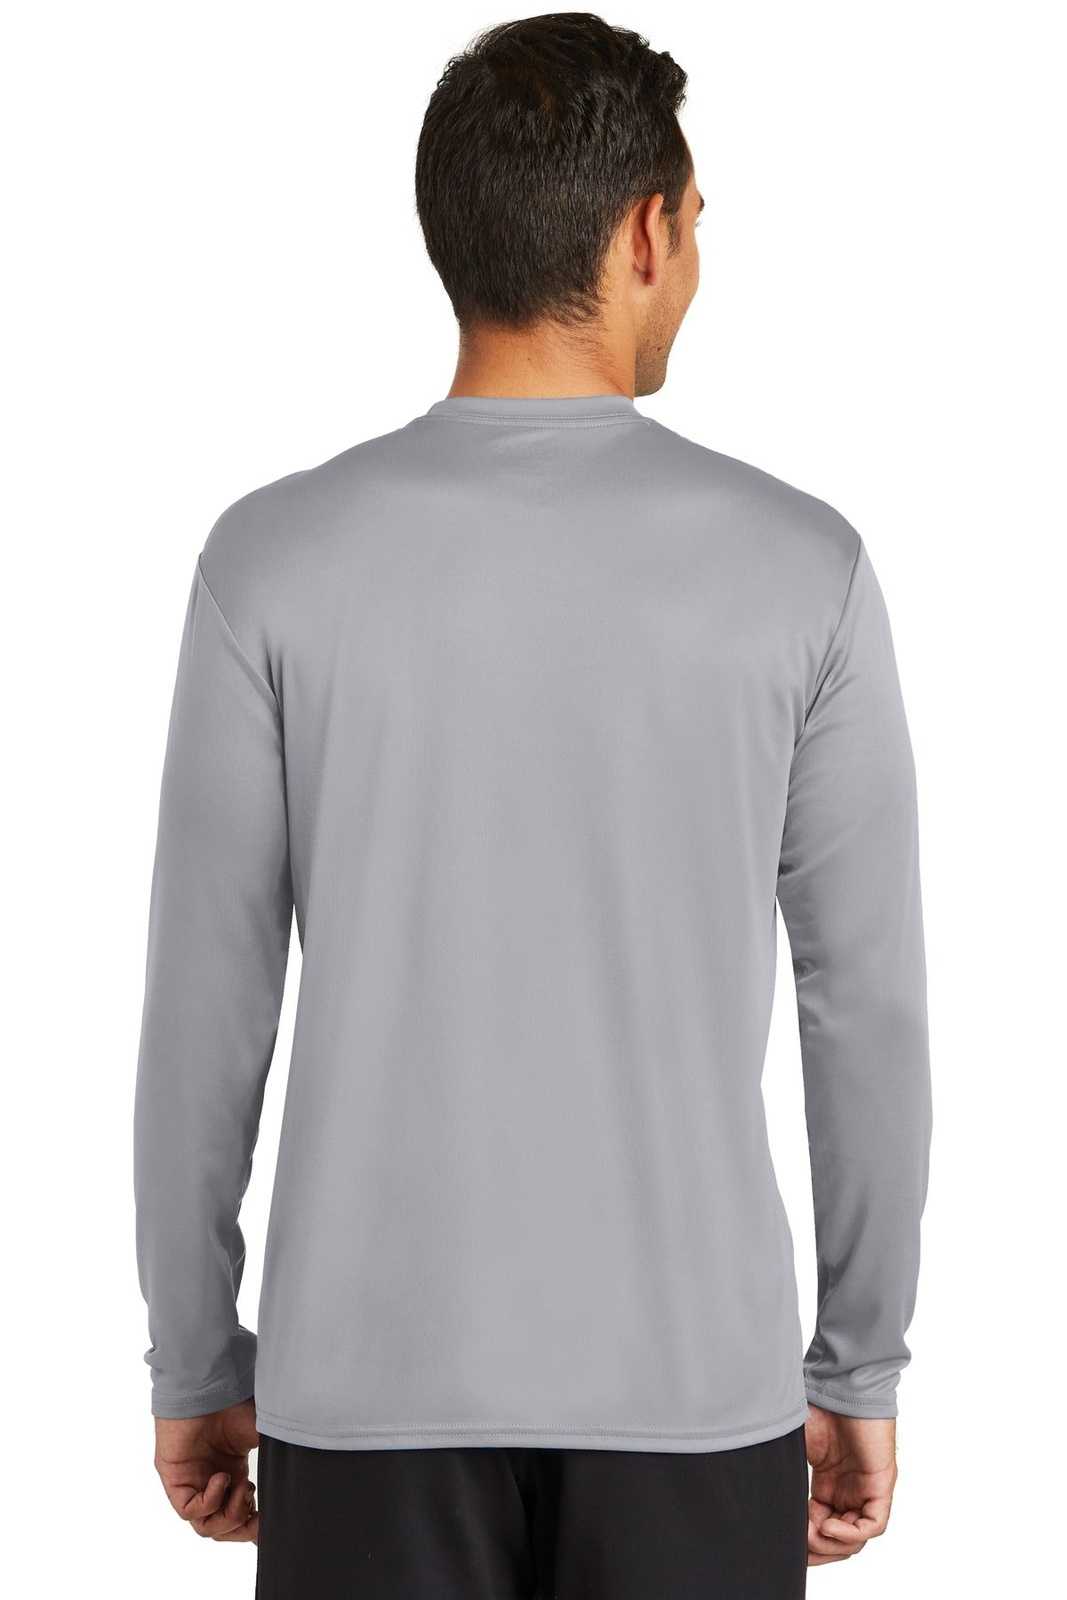 Port & Company PC380LS Long Sleeve Performance Tee - Silver - HIT a Double - 1